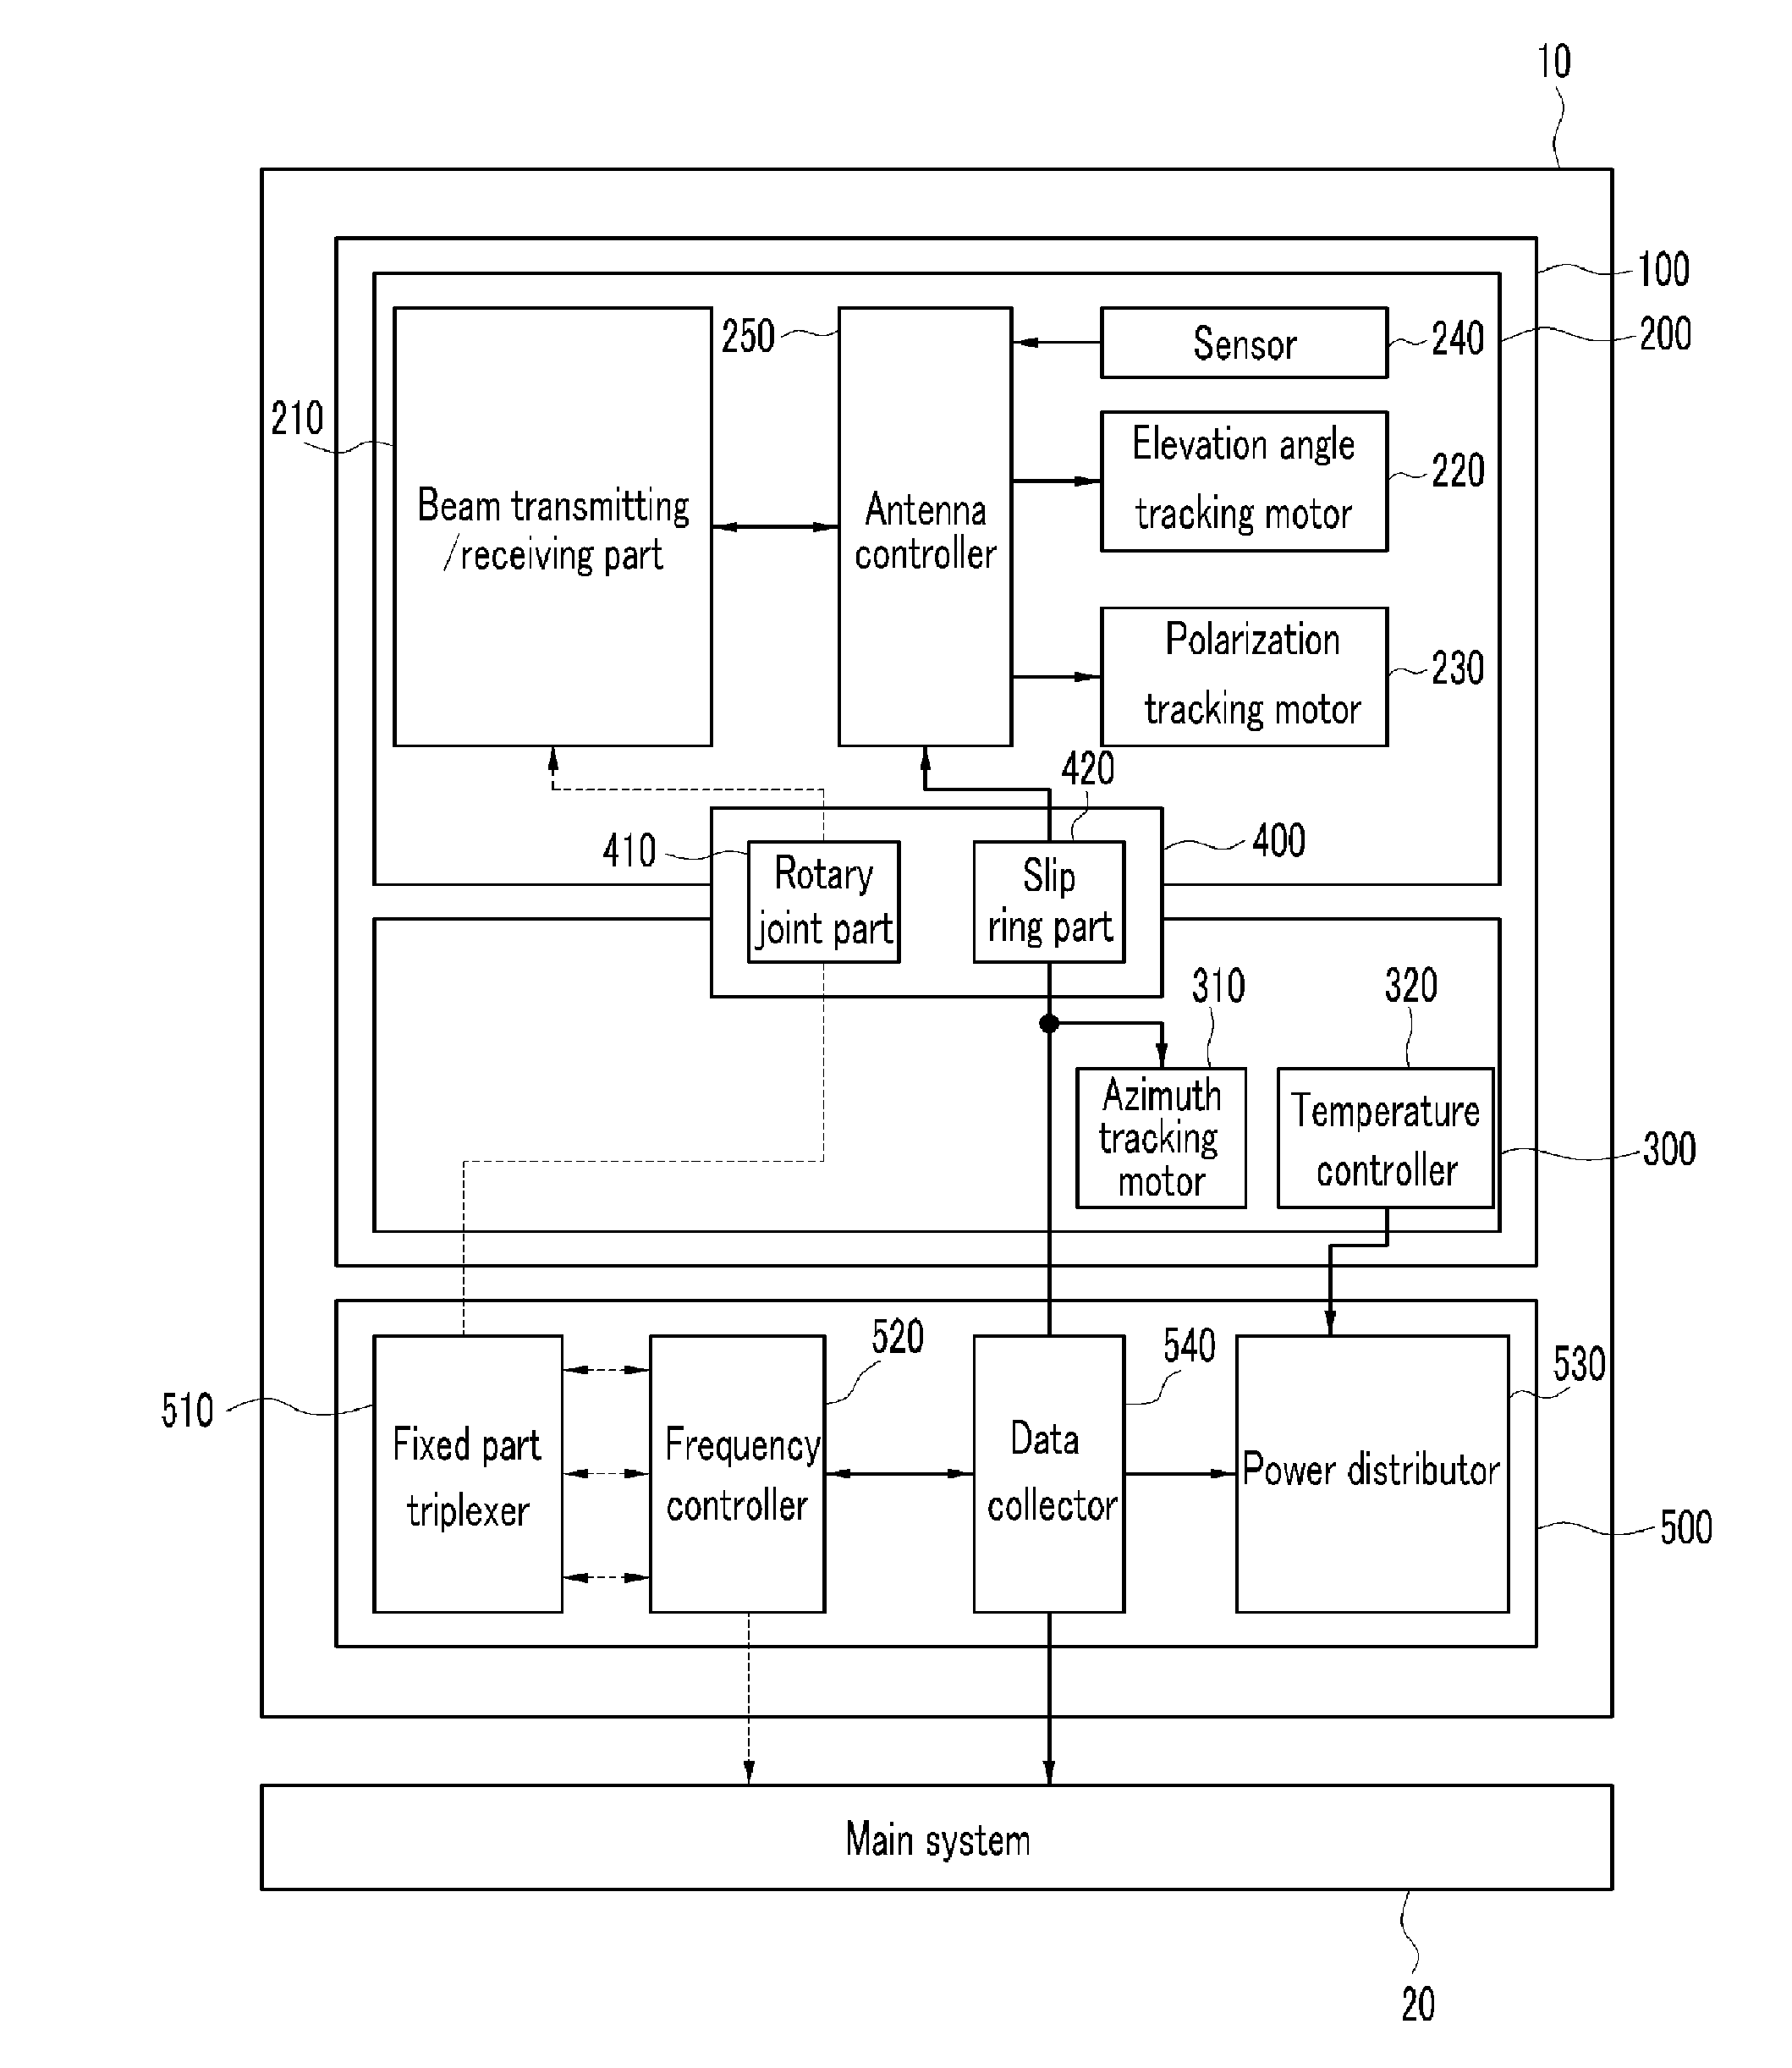 Antenna system for mobile vehicles